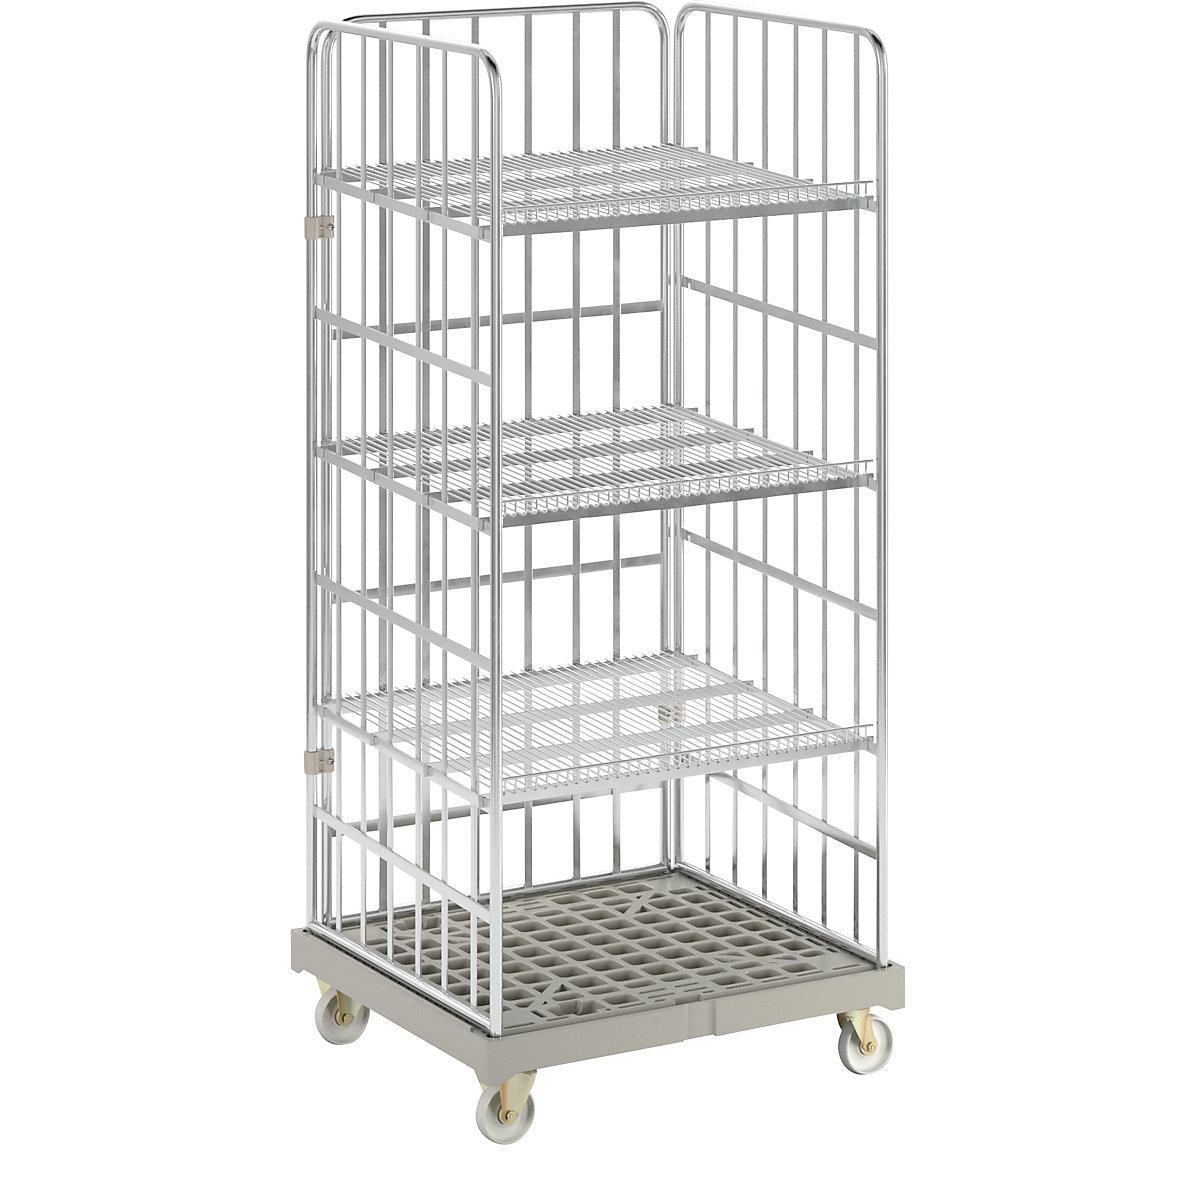 Roll cage incl. shelves, plastic transport base, grey dolly-11